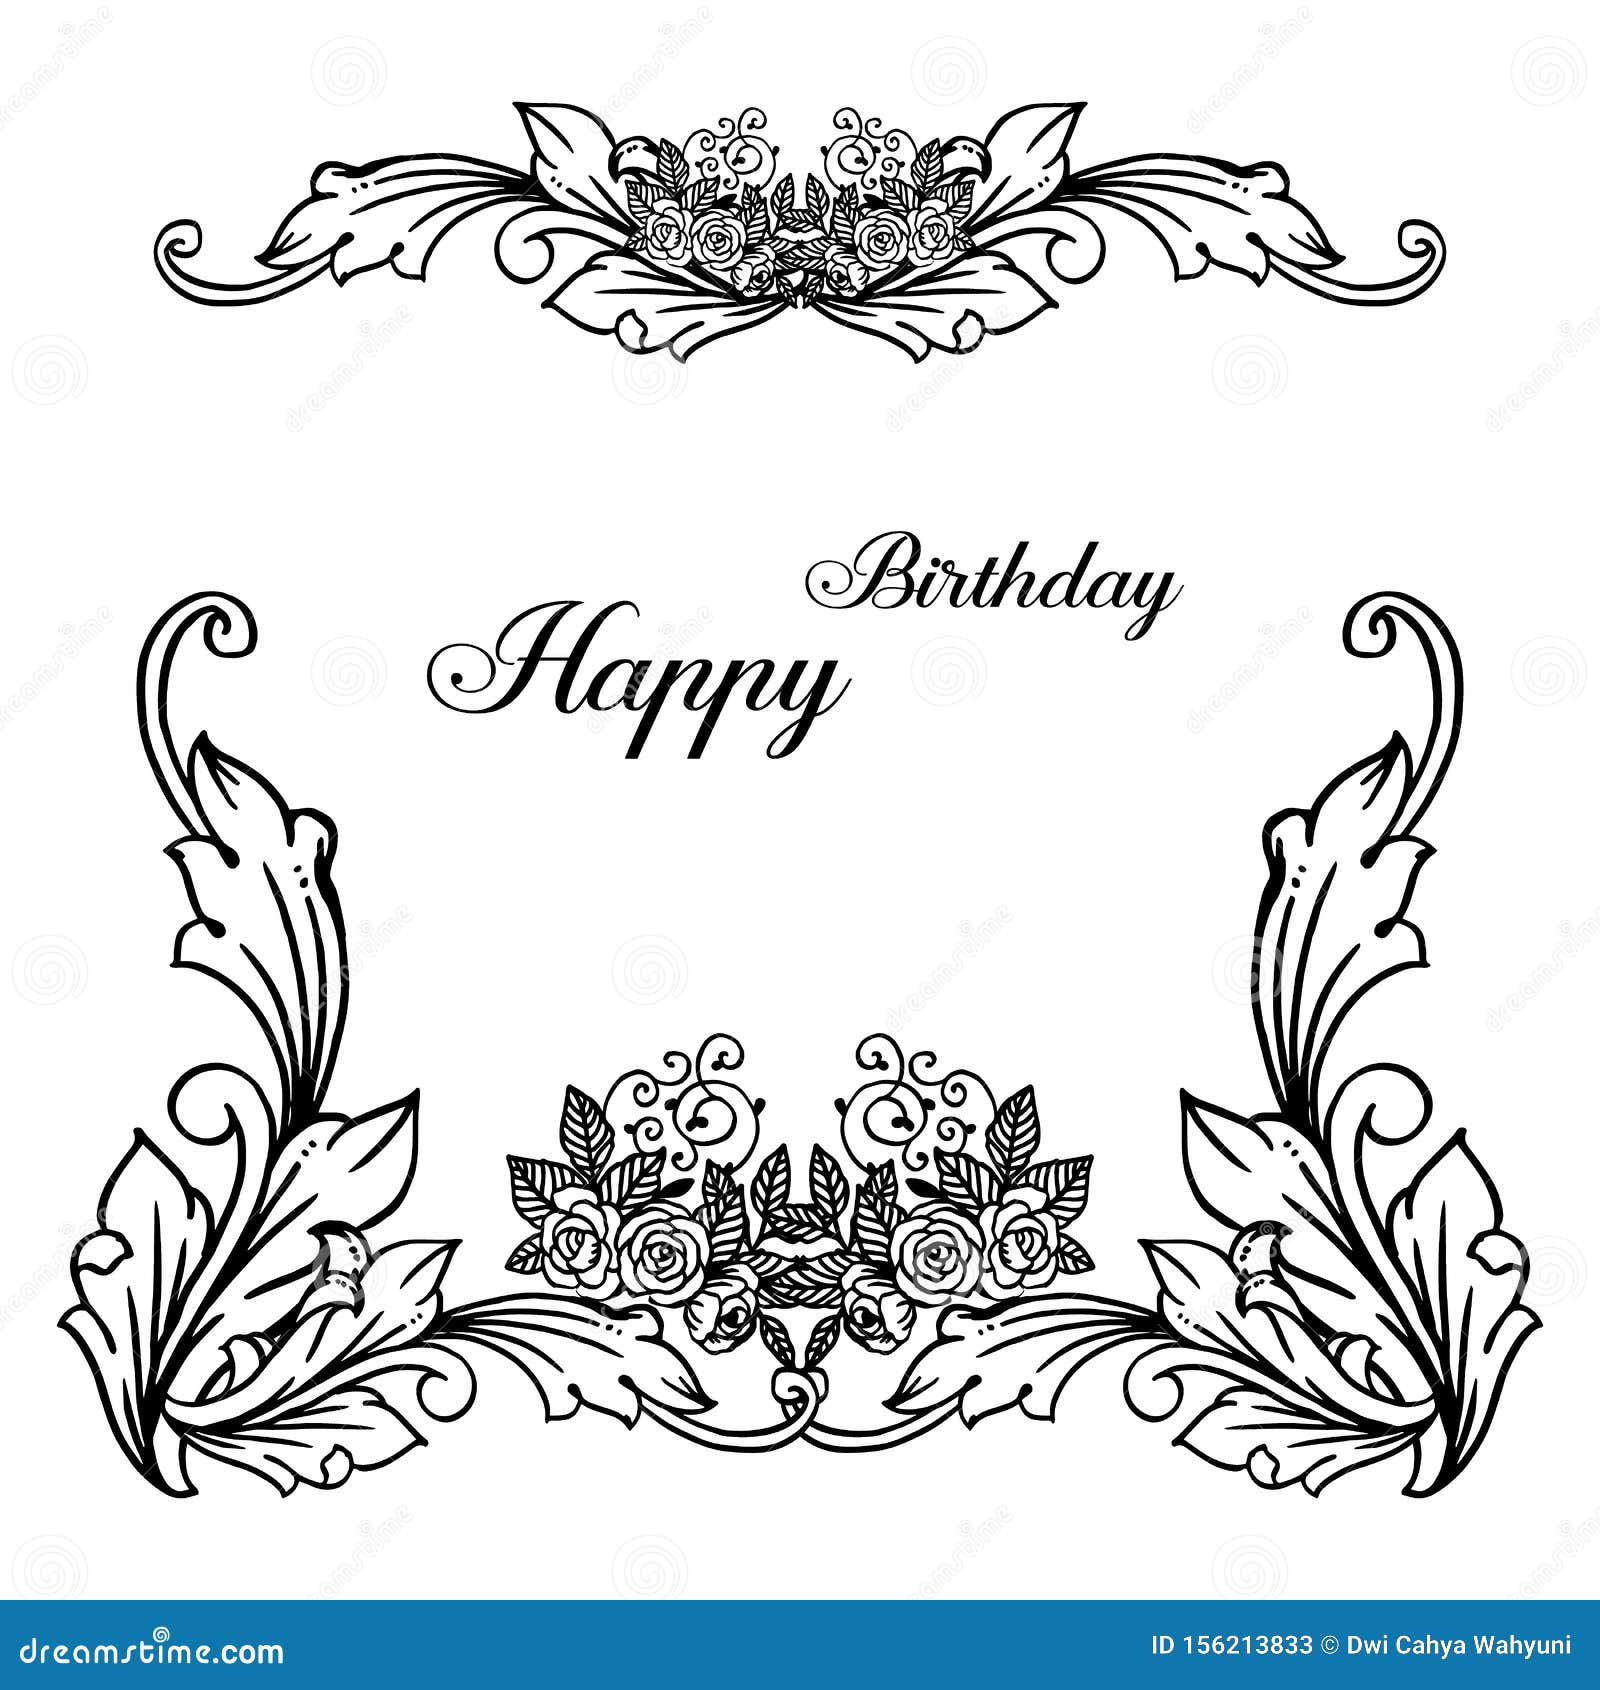 Vintage Happy Birthday Card, with Cute Wreath Frame, Isolated on a ...